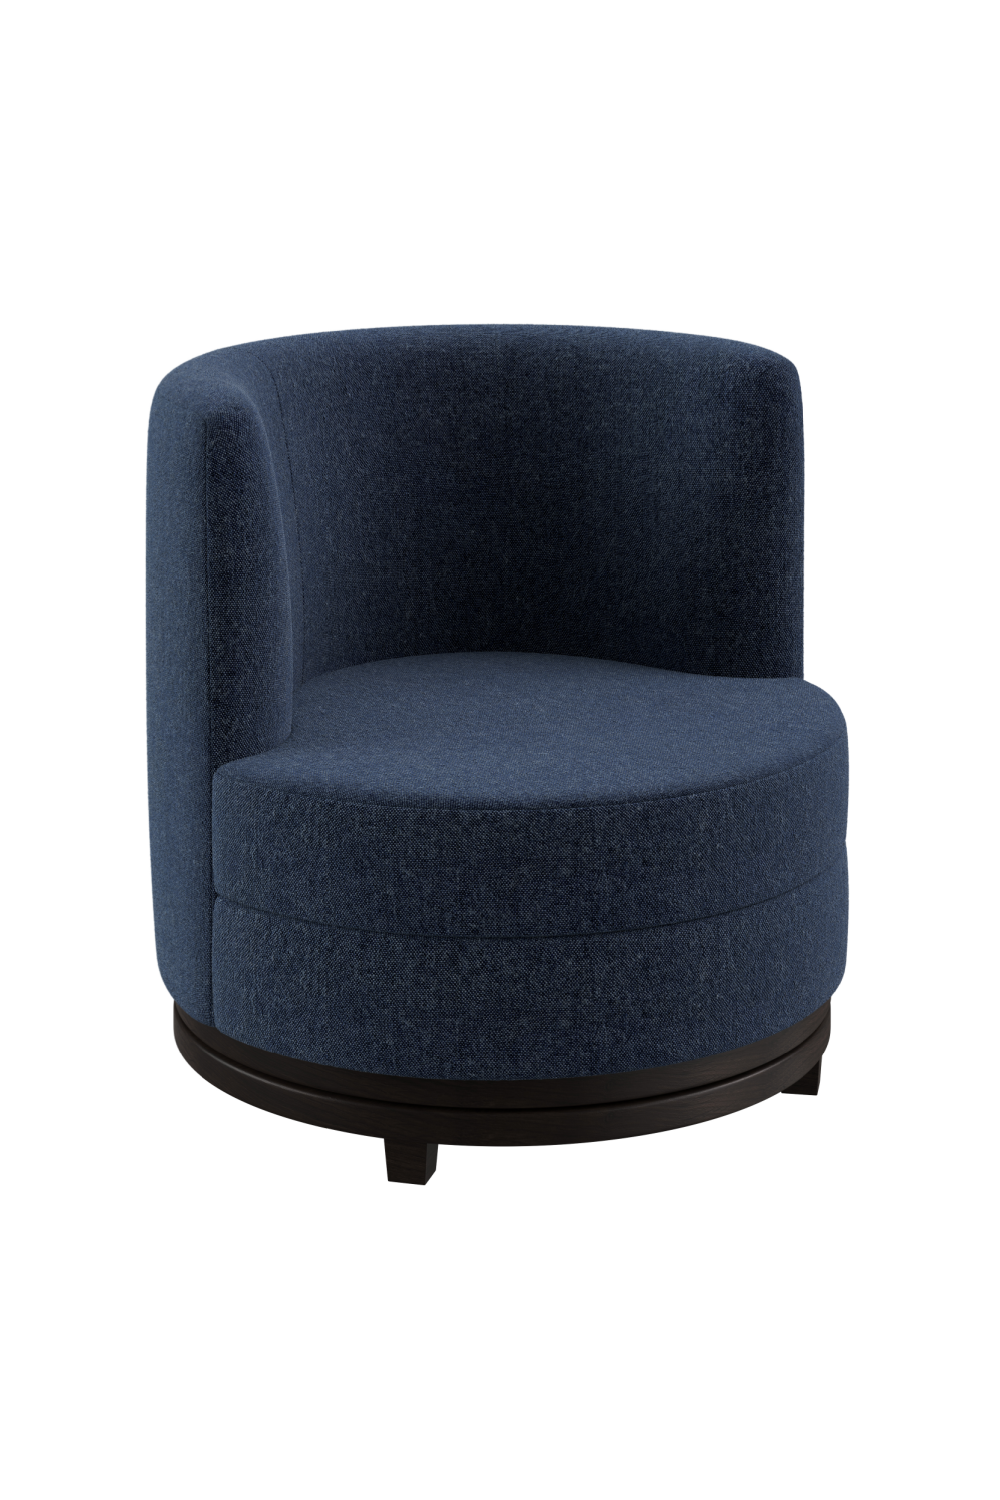 Upholstered Swivel Lounge Chair | Dome Deco Ayden | Oroa.com